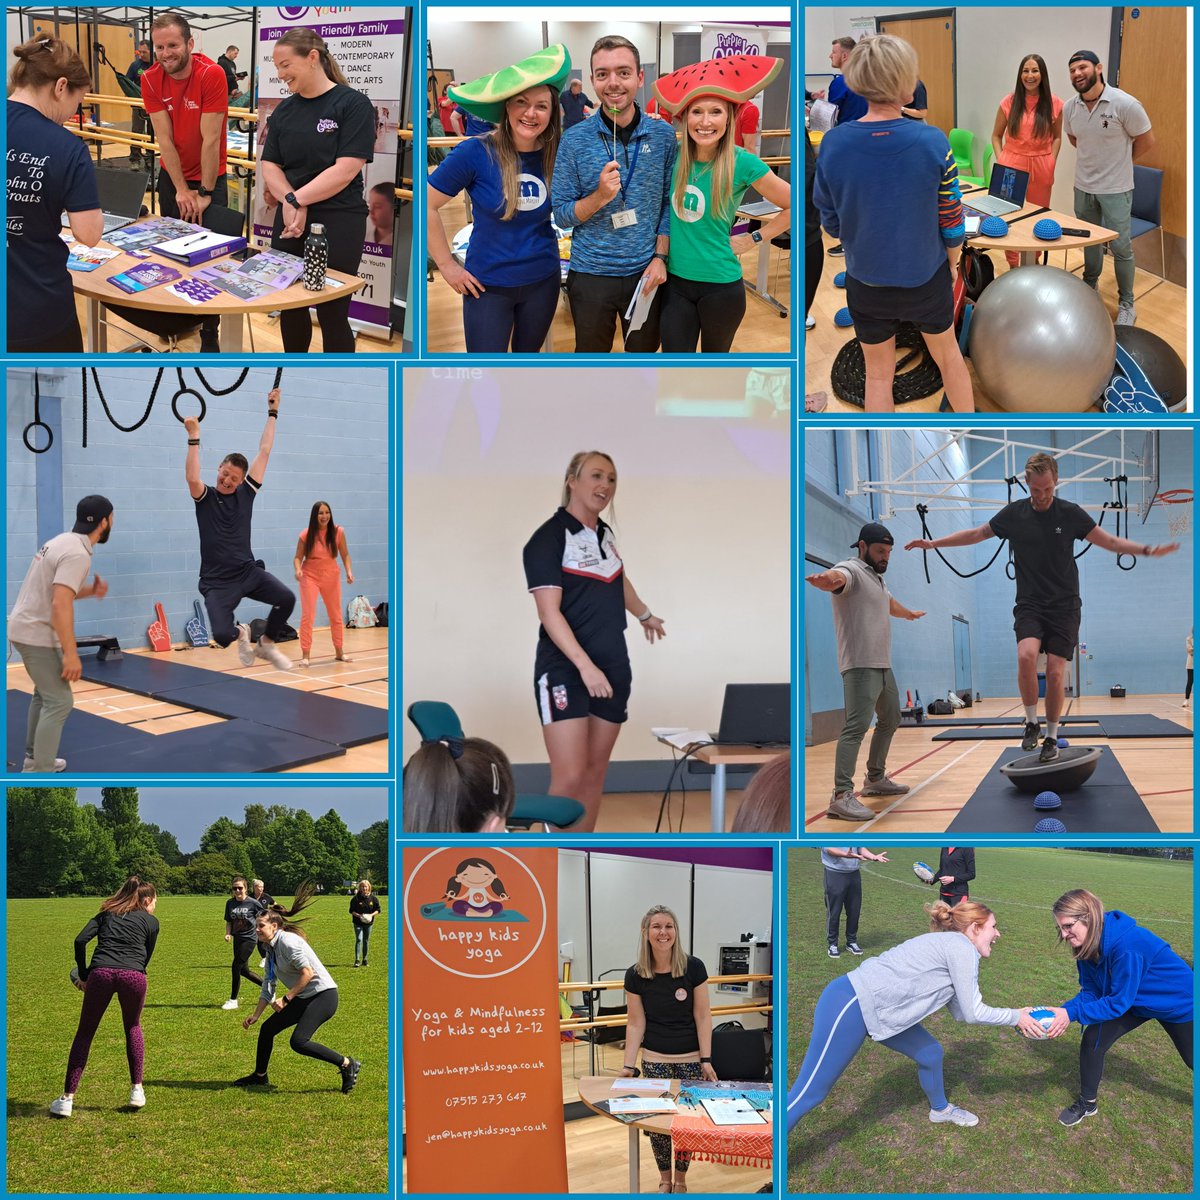 Huge thanks to all involved in making our 'Warrington PE Conference' such a fun, informative & thought-provoking event 🤩
#movementismedicine was our golden thread, challenging us to use funding wisely for the next generation🏃🏾🏊🏼‍♀️🚴🏽 @YourLiveWire @SSPWarrington
@WWRLFoundation